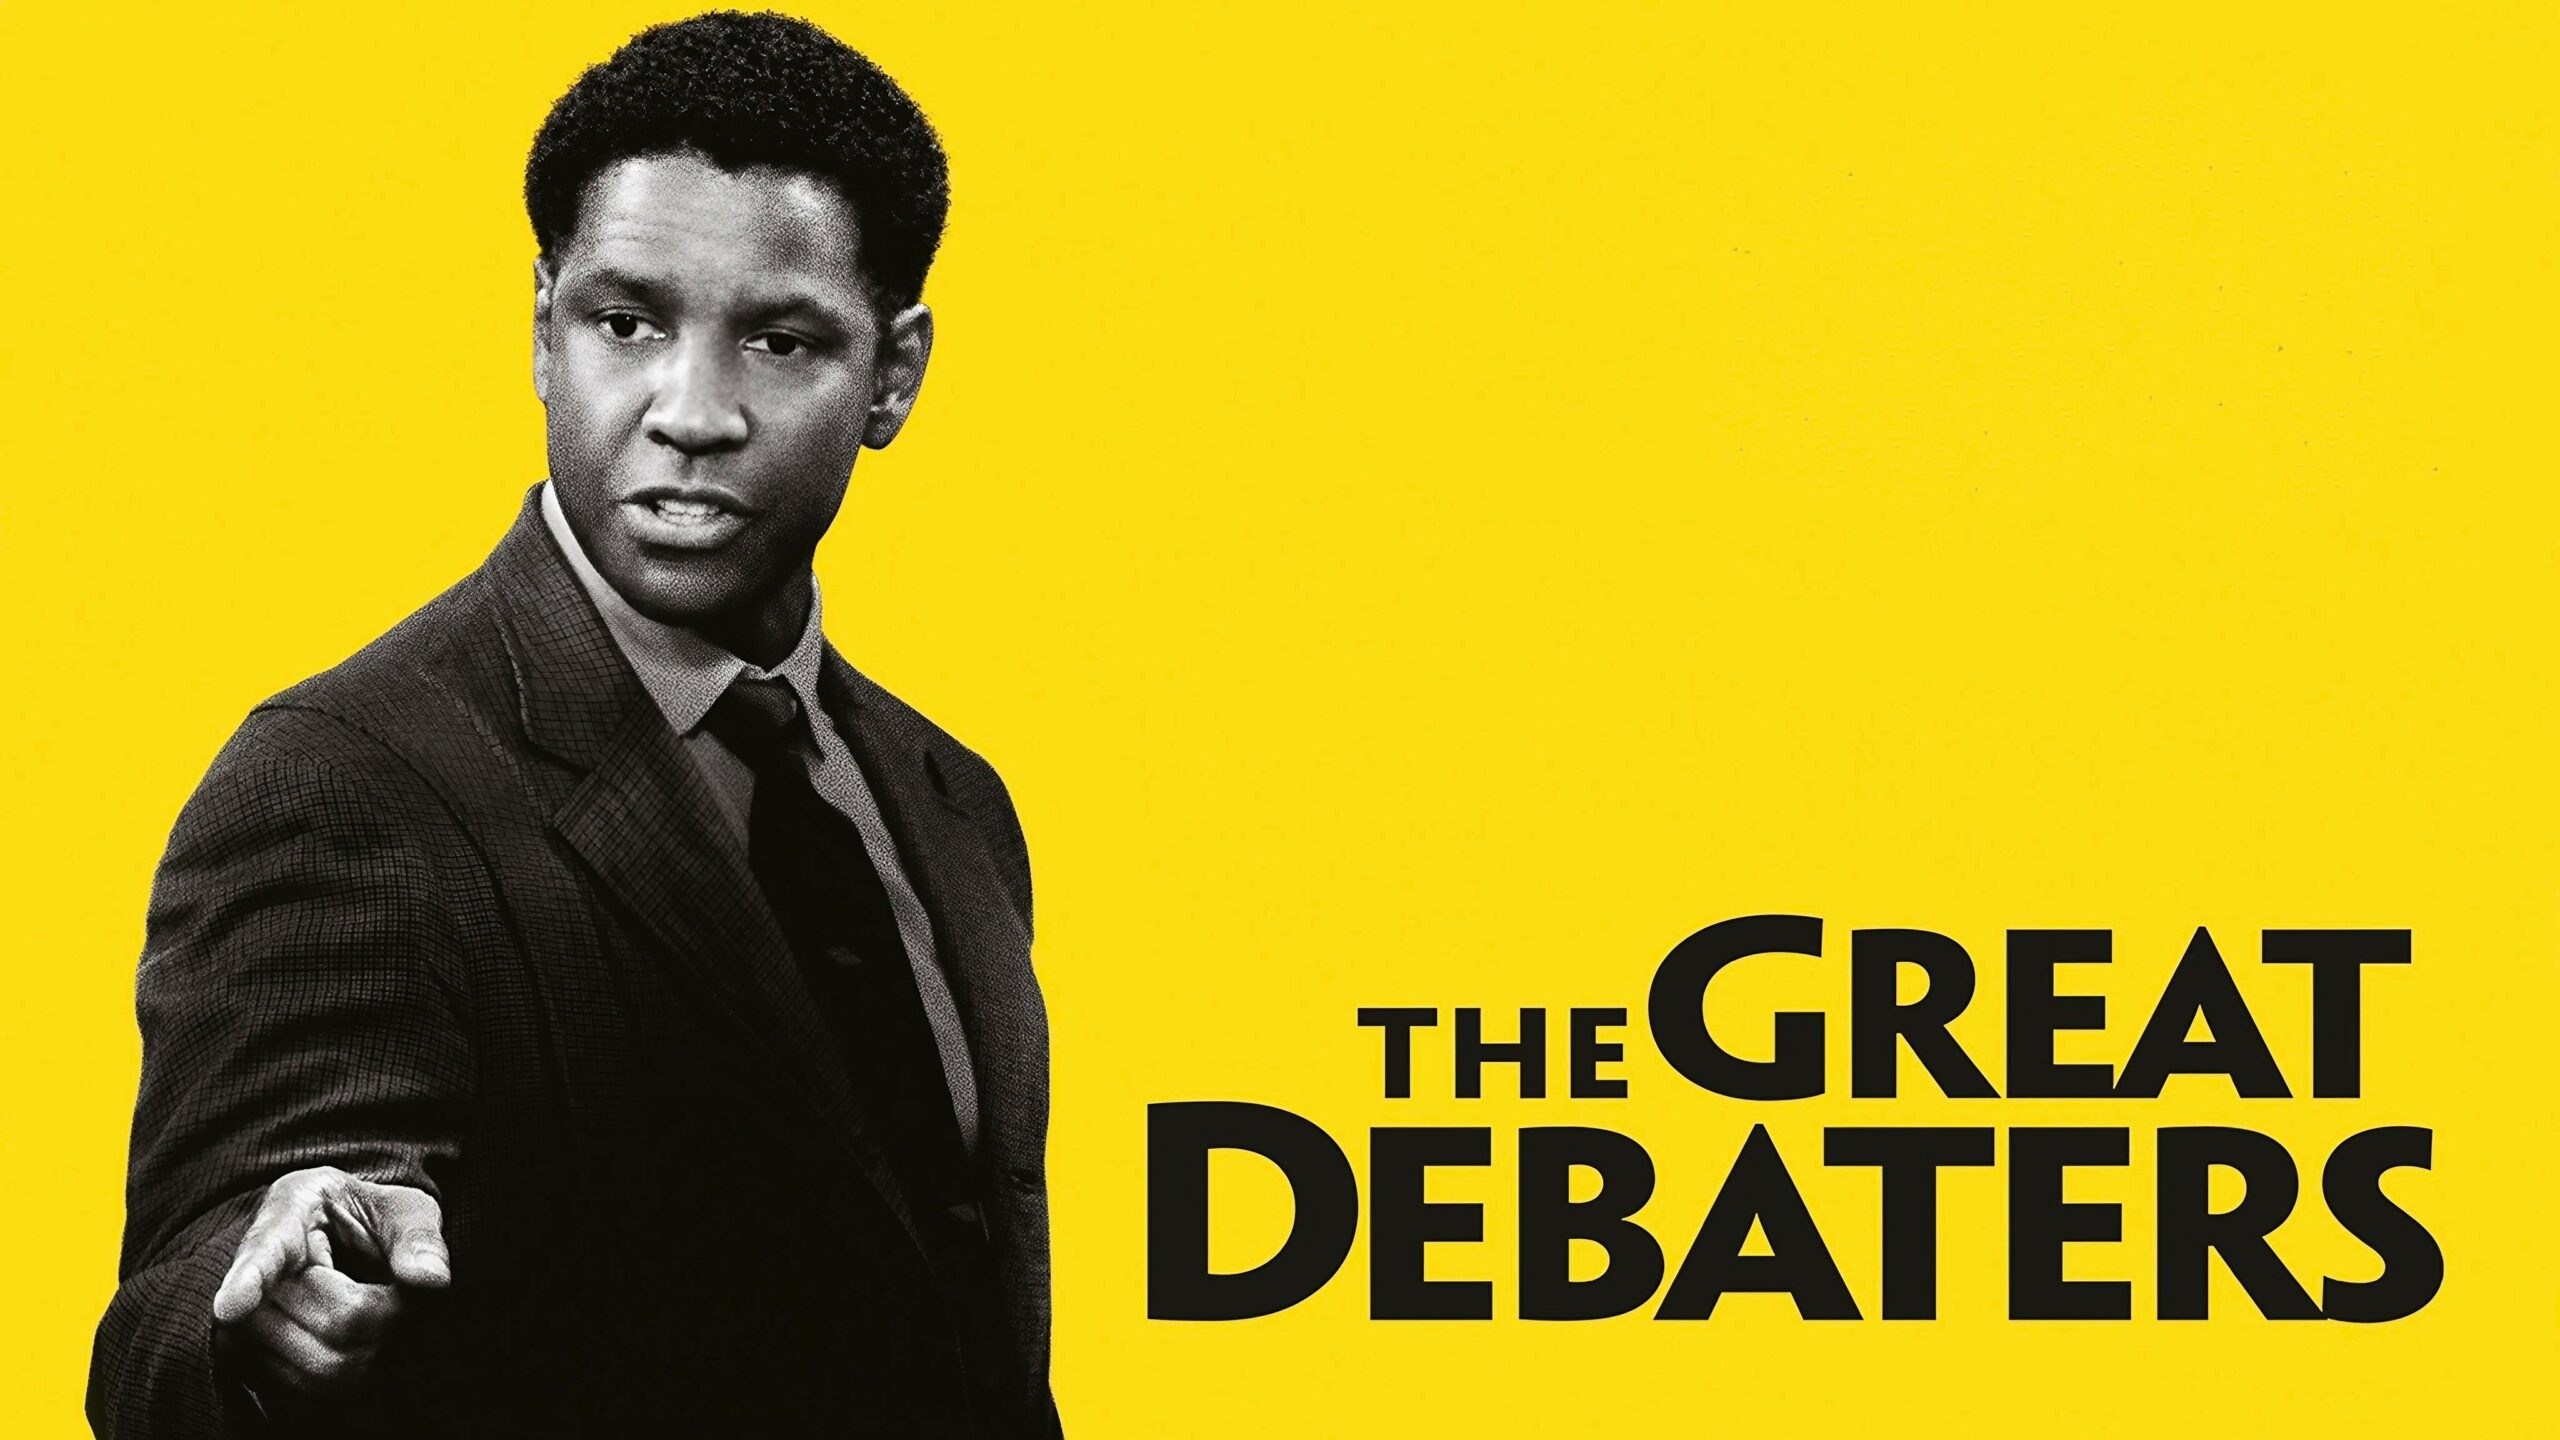 is the great debaters based on a true story